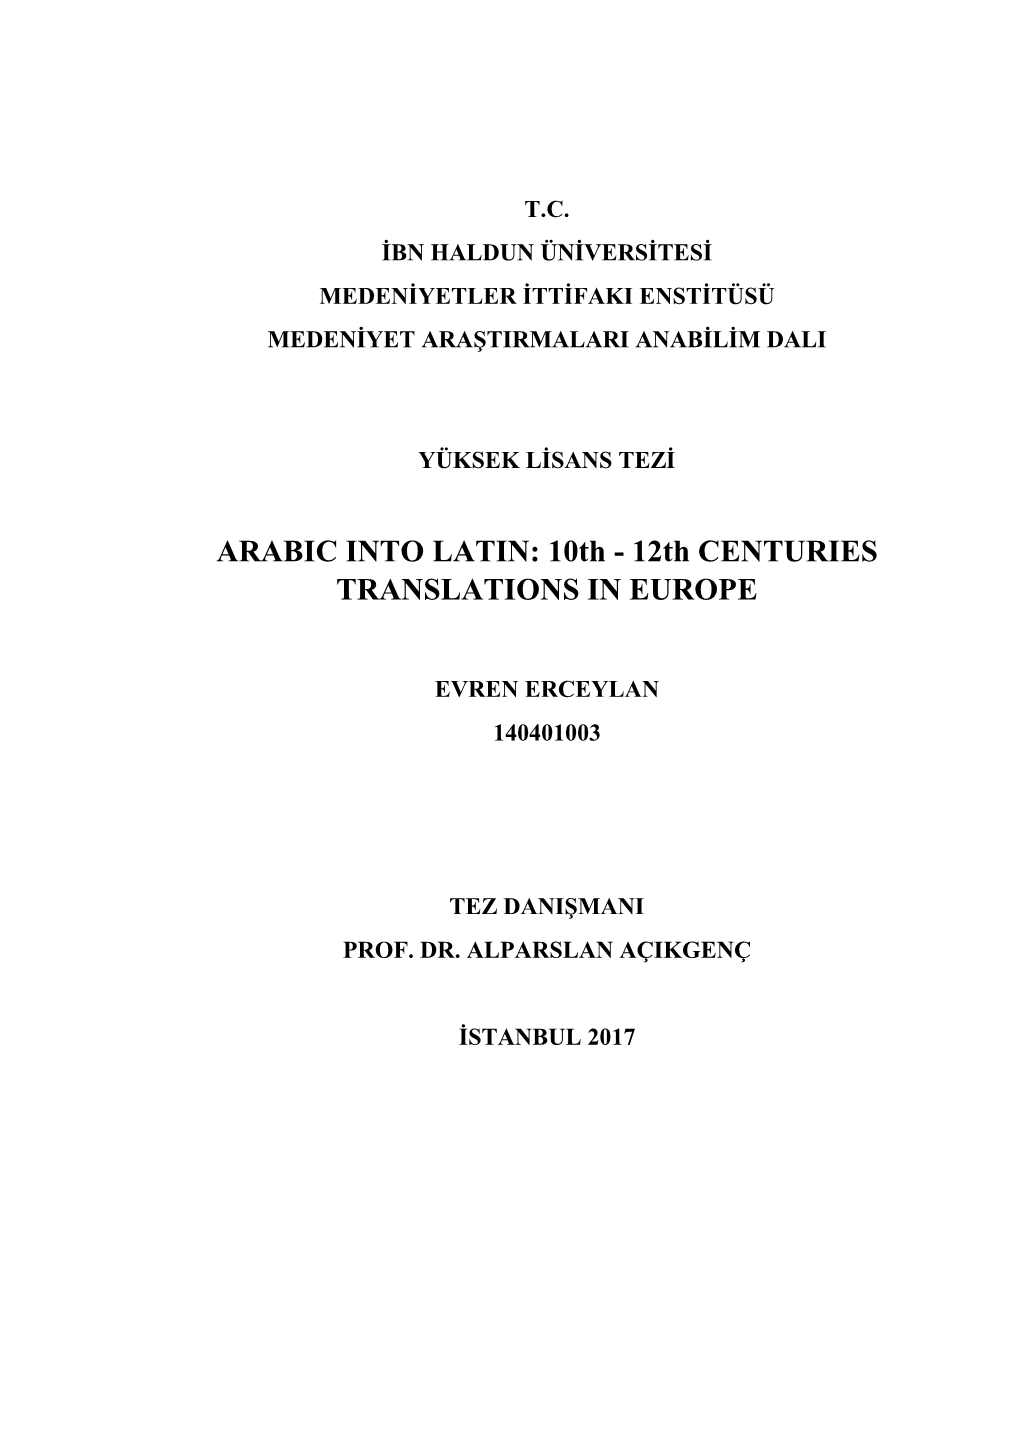 ARABIC INTO LATIN: 10Th - 12Th CENTURIES TRANSLATIONS in EUROPE